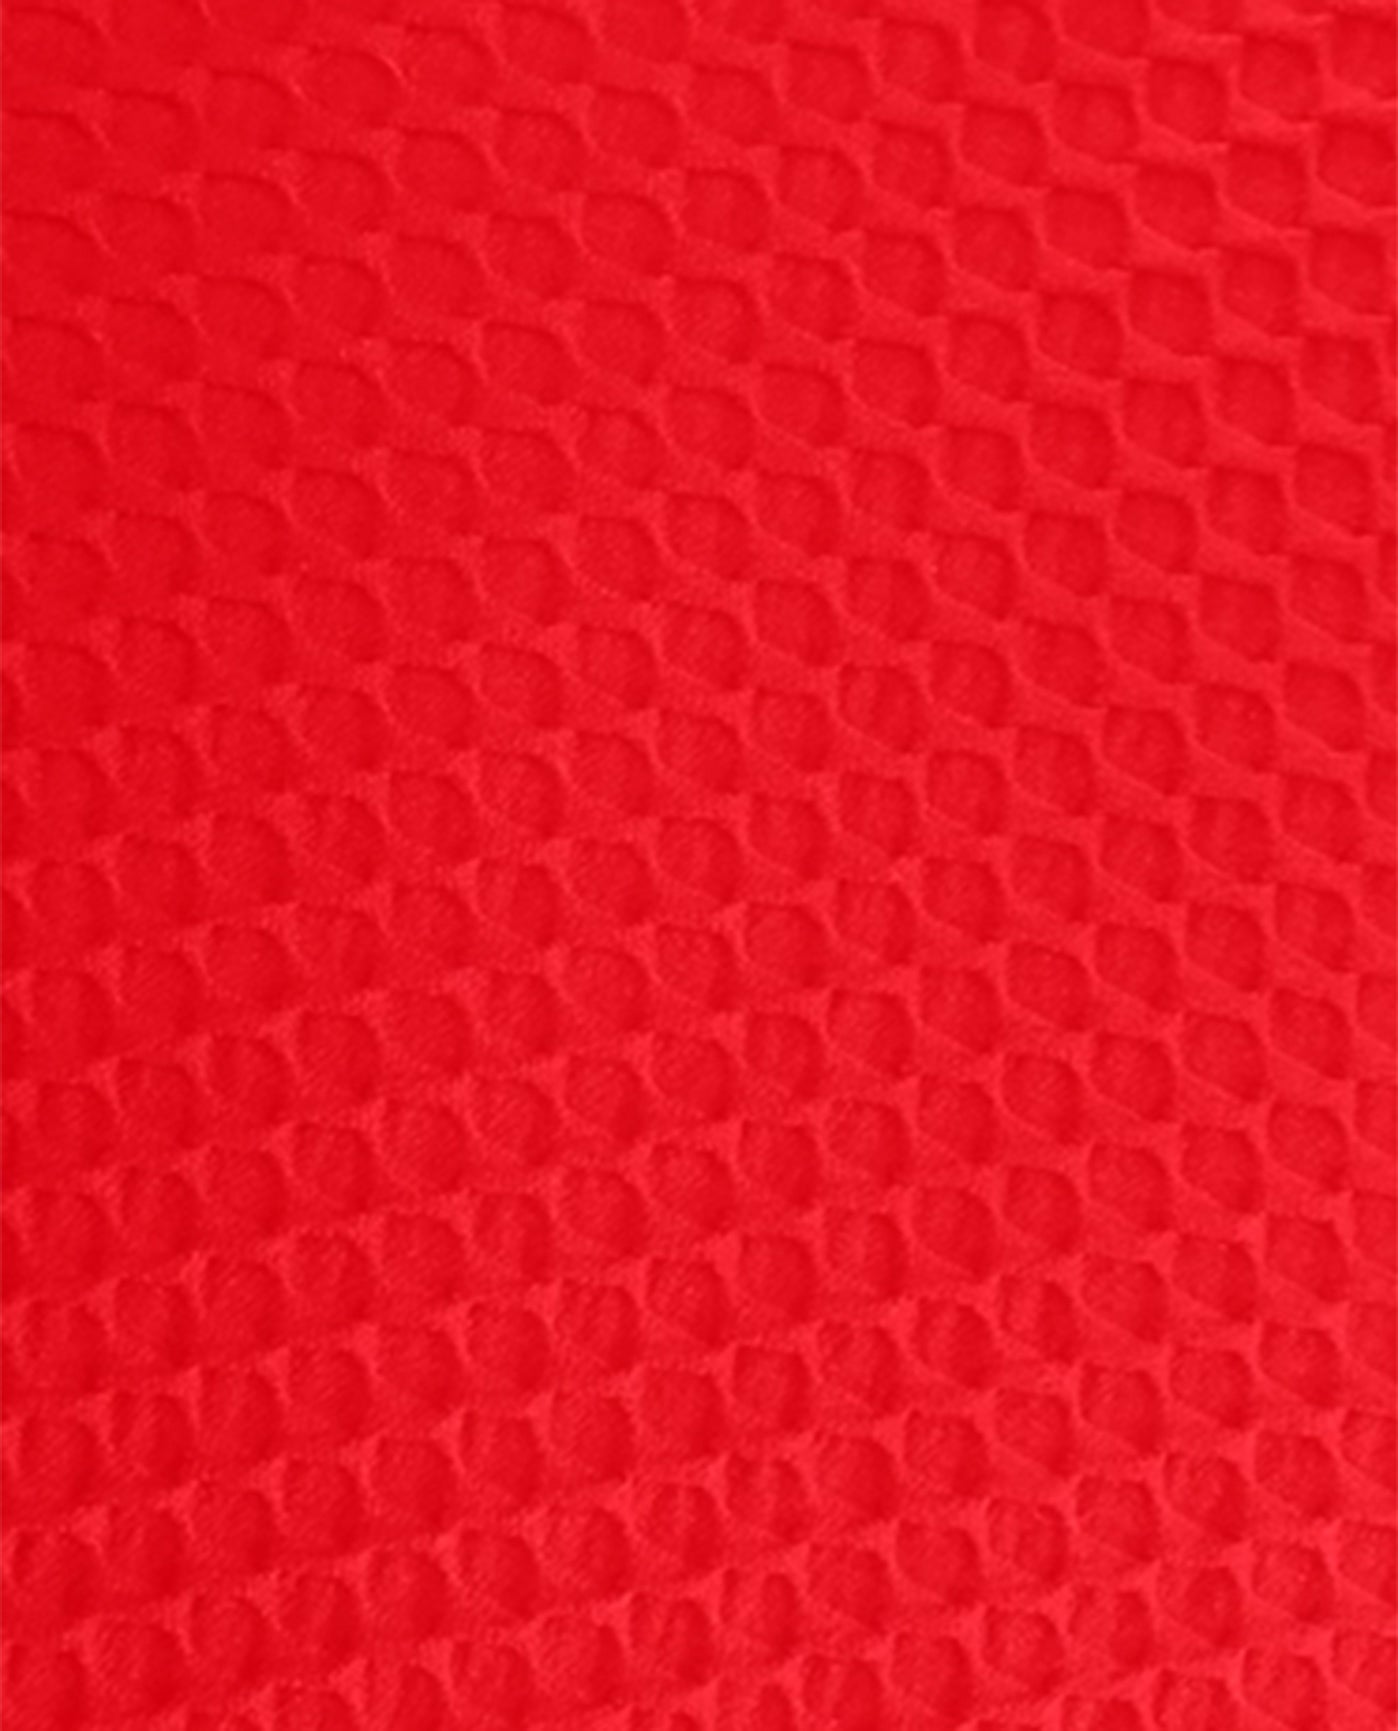 FABRIC SWATCH VIEW OF CHLORINE RESISTANT AQUAMORE COLOR BLOCK TEXTURED TWIST FRONT PLUS SIZE SWIMSUIT | 616 AQT TEXTURED SCARLET